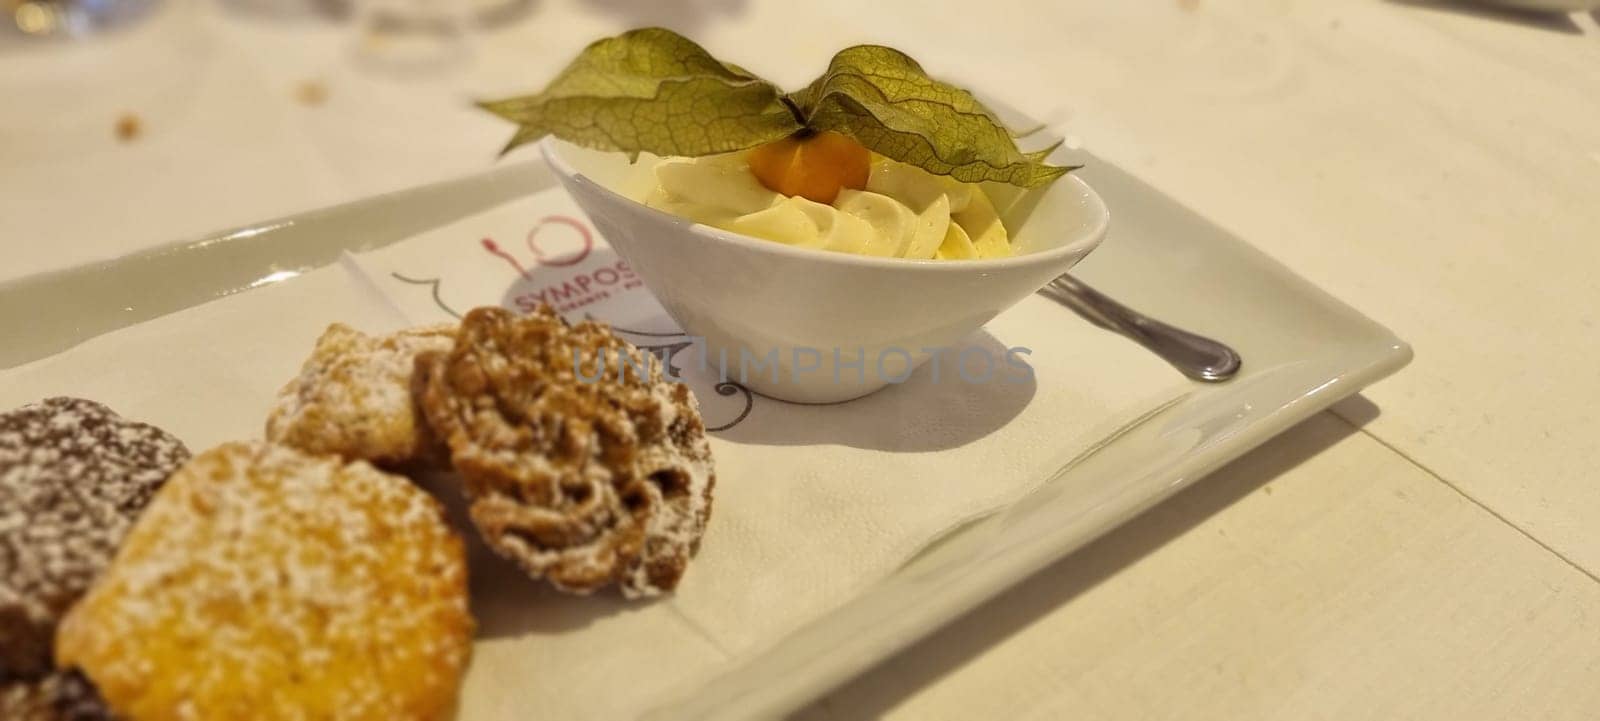 Delicate selection of italian pastries served with whipped cream garnished with a physalis fruit